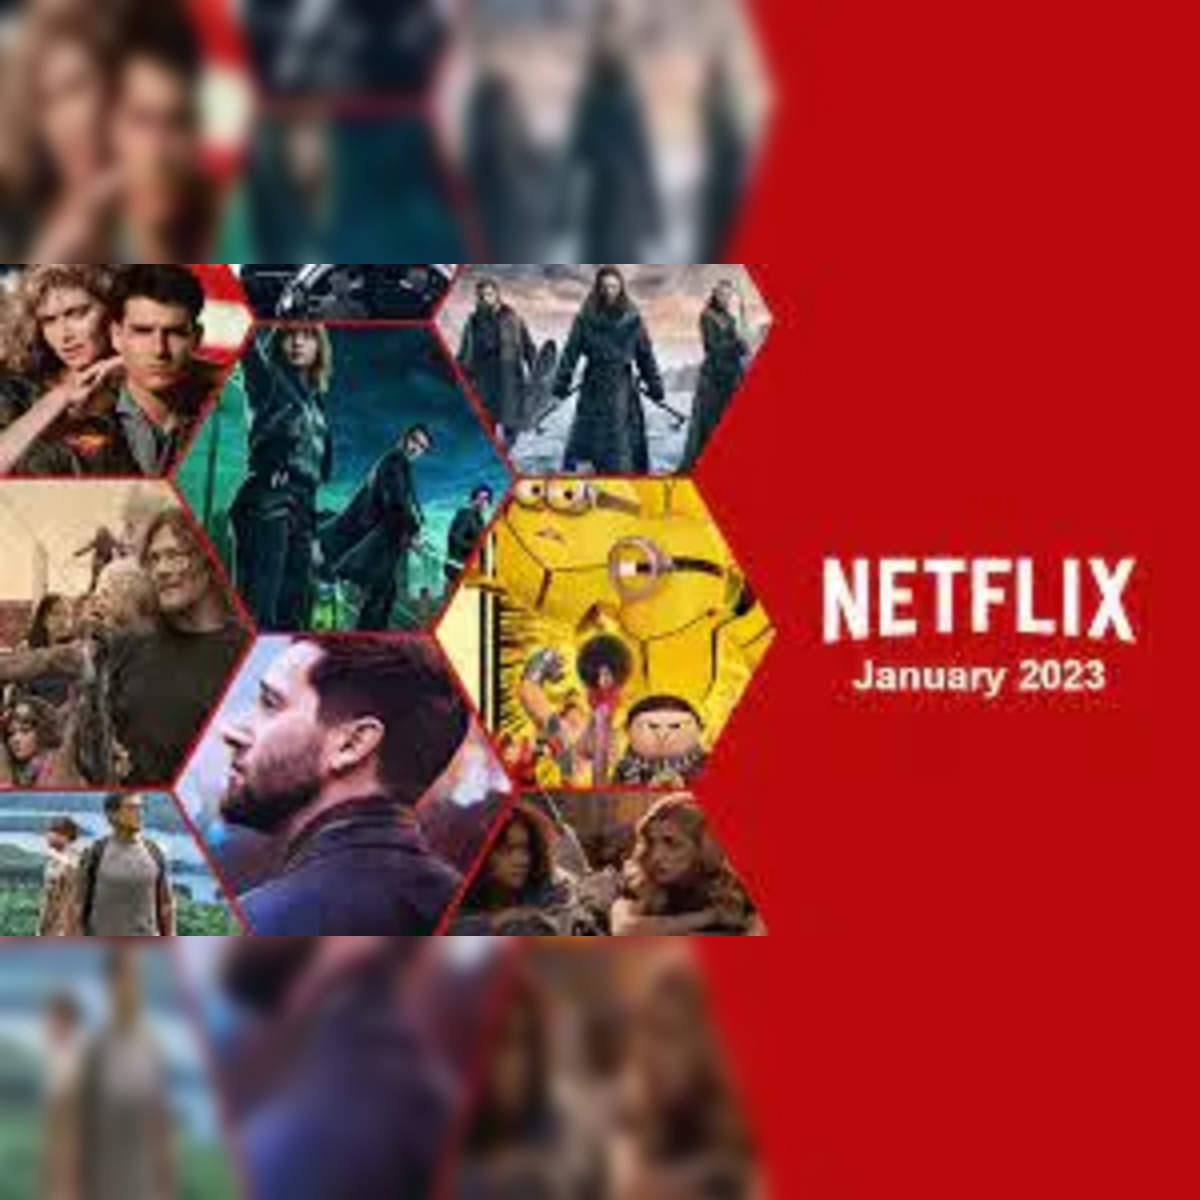 Netflix Series Measurement & More for the US Top 10 TV Shows